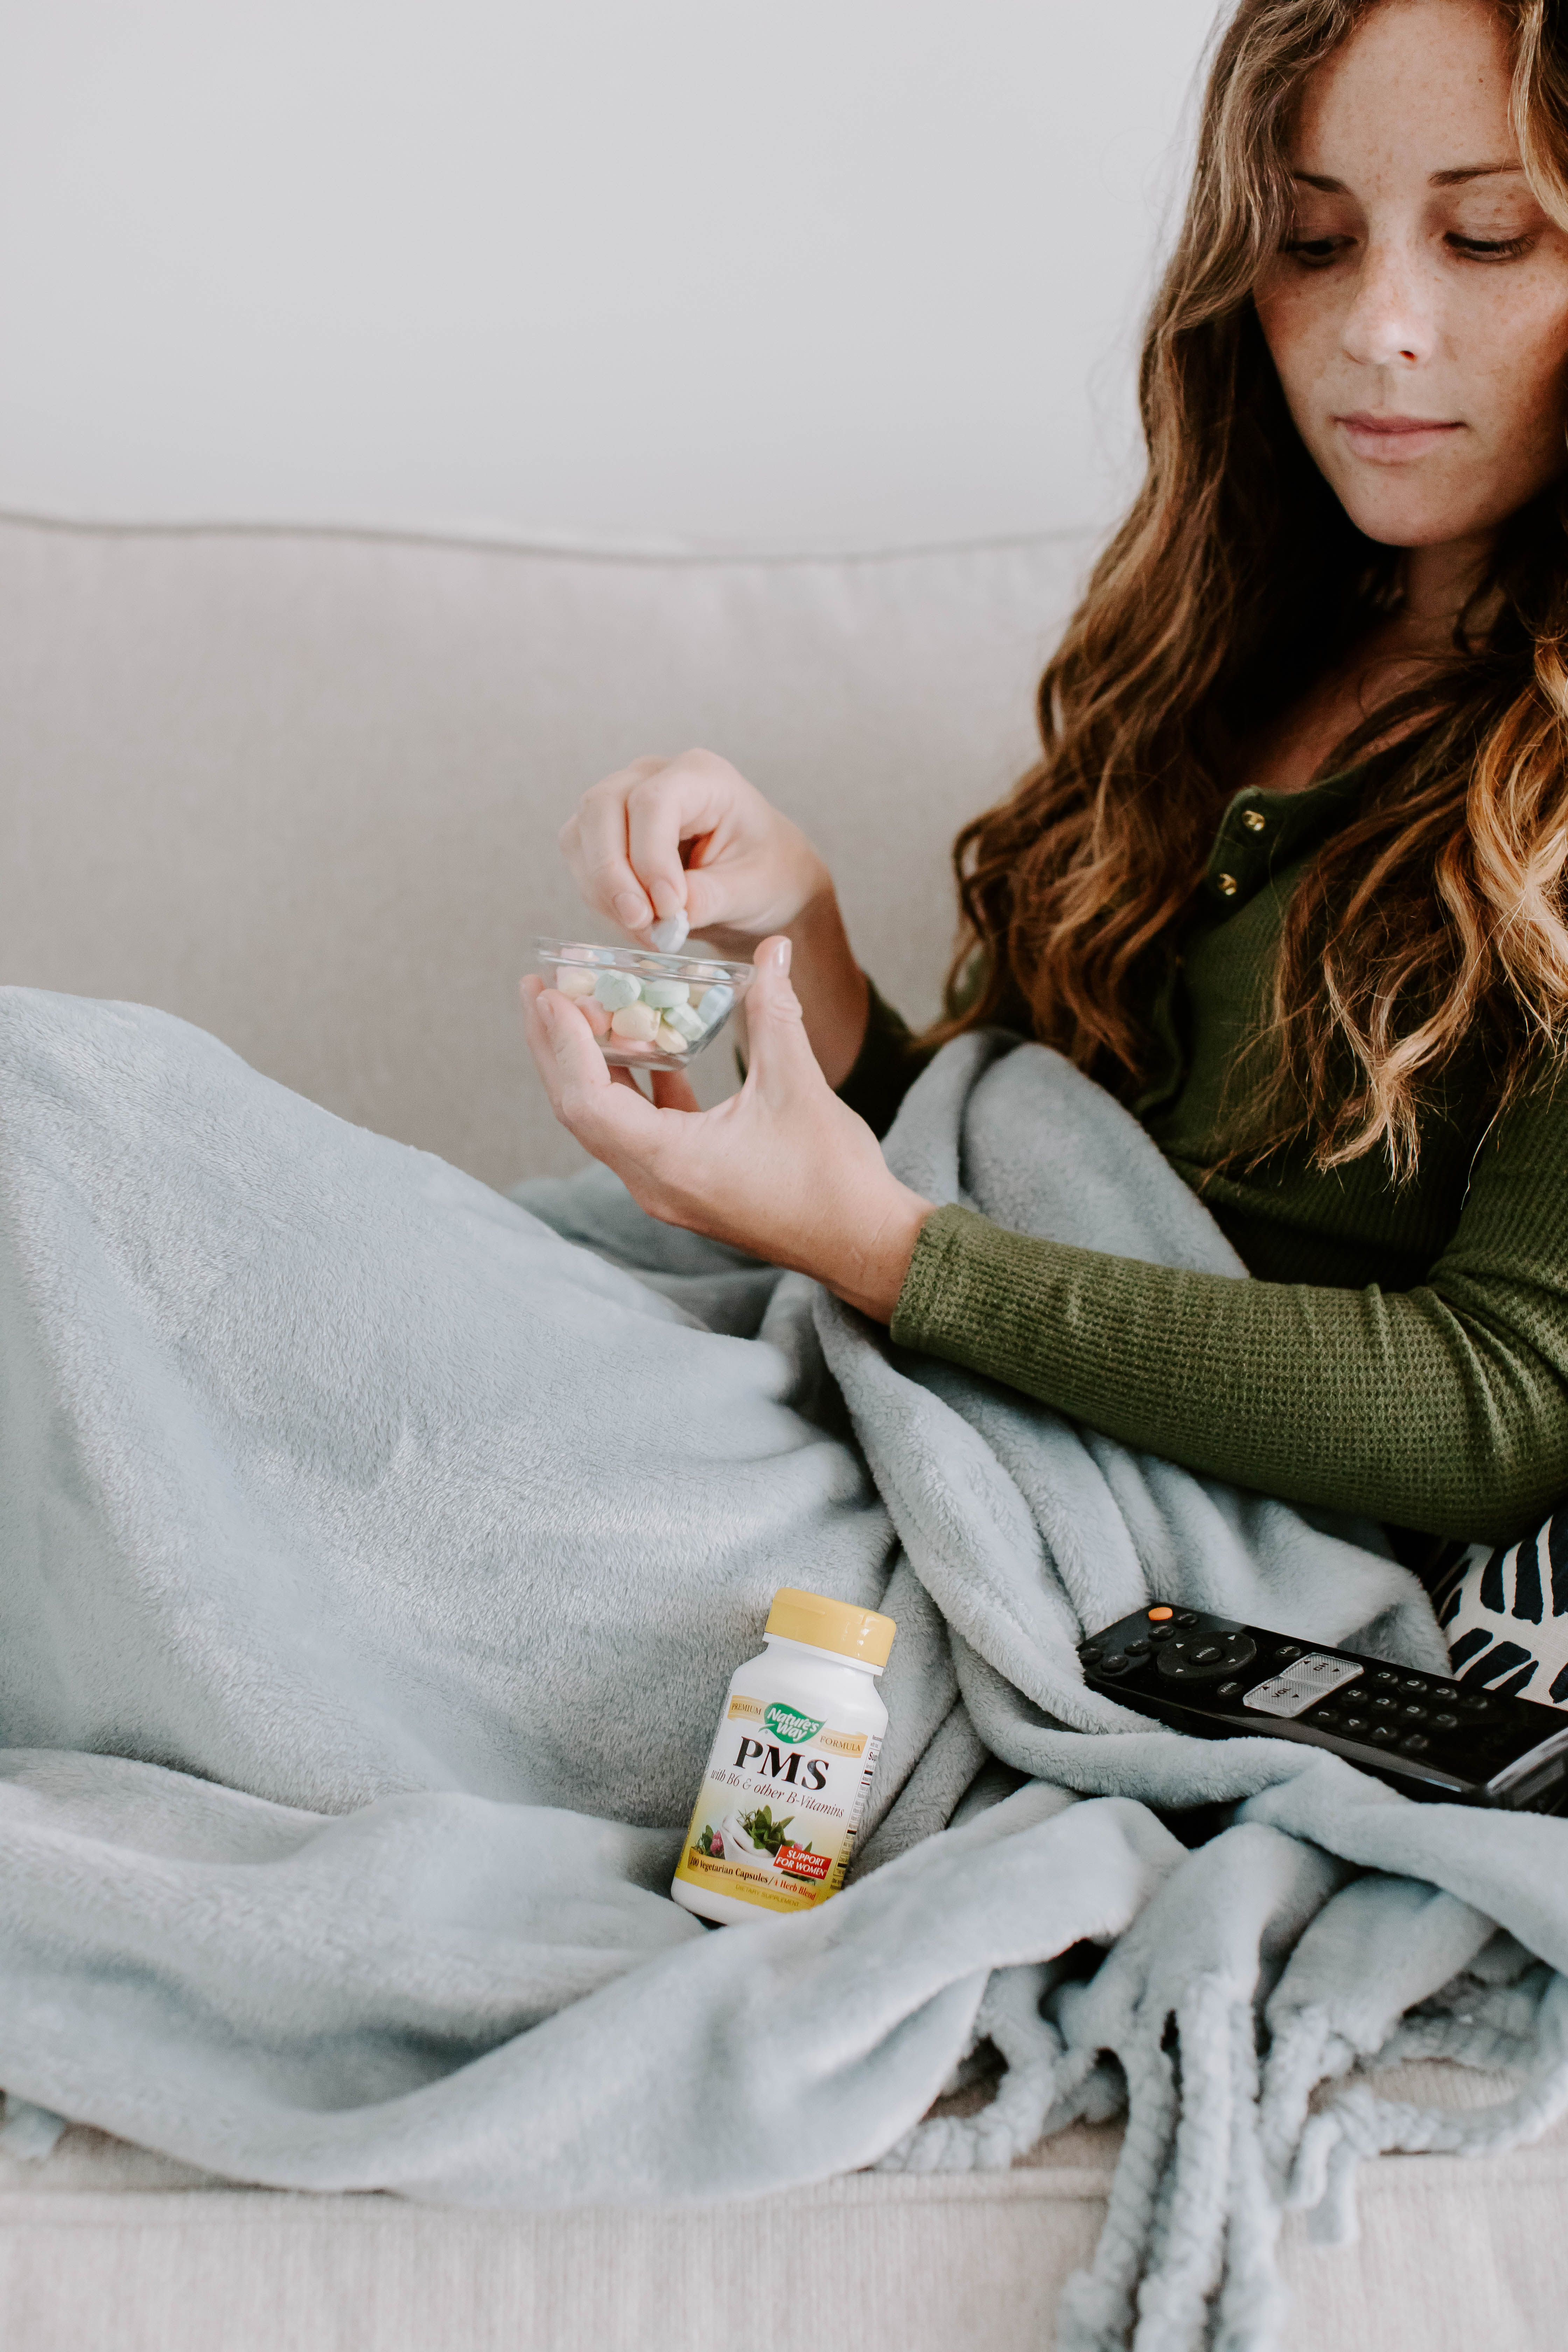 Woman eating candy on the couch with vitamins